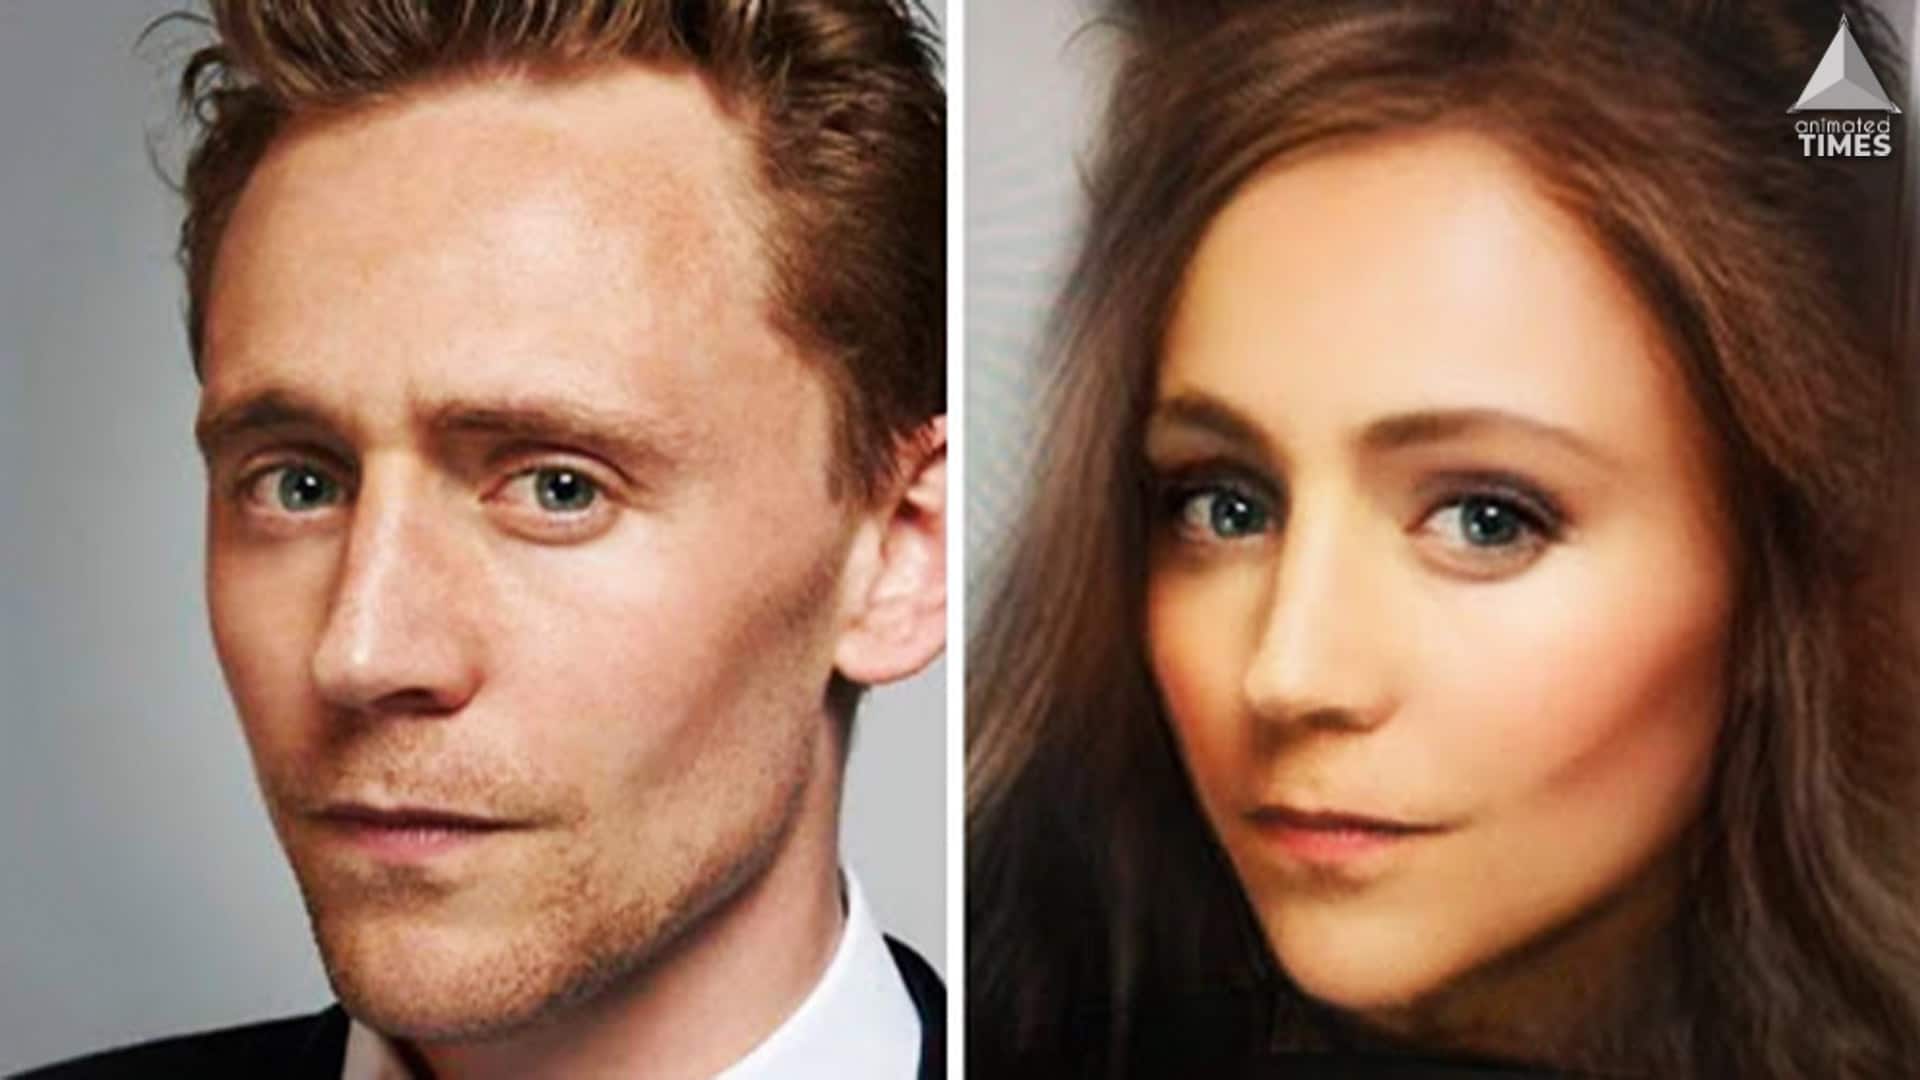 Marvel Actors And Their Gender-Swapped Snapchat Filter Pictures